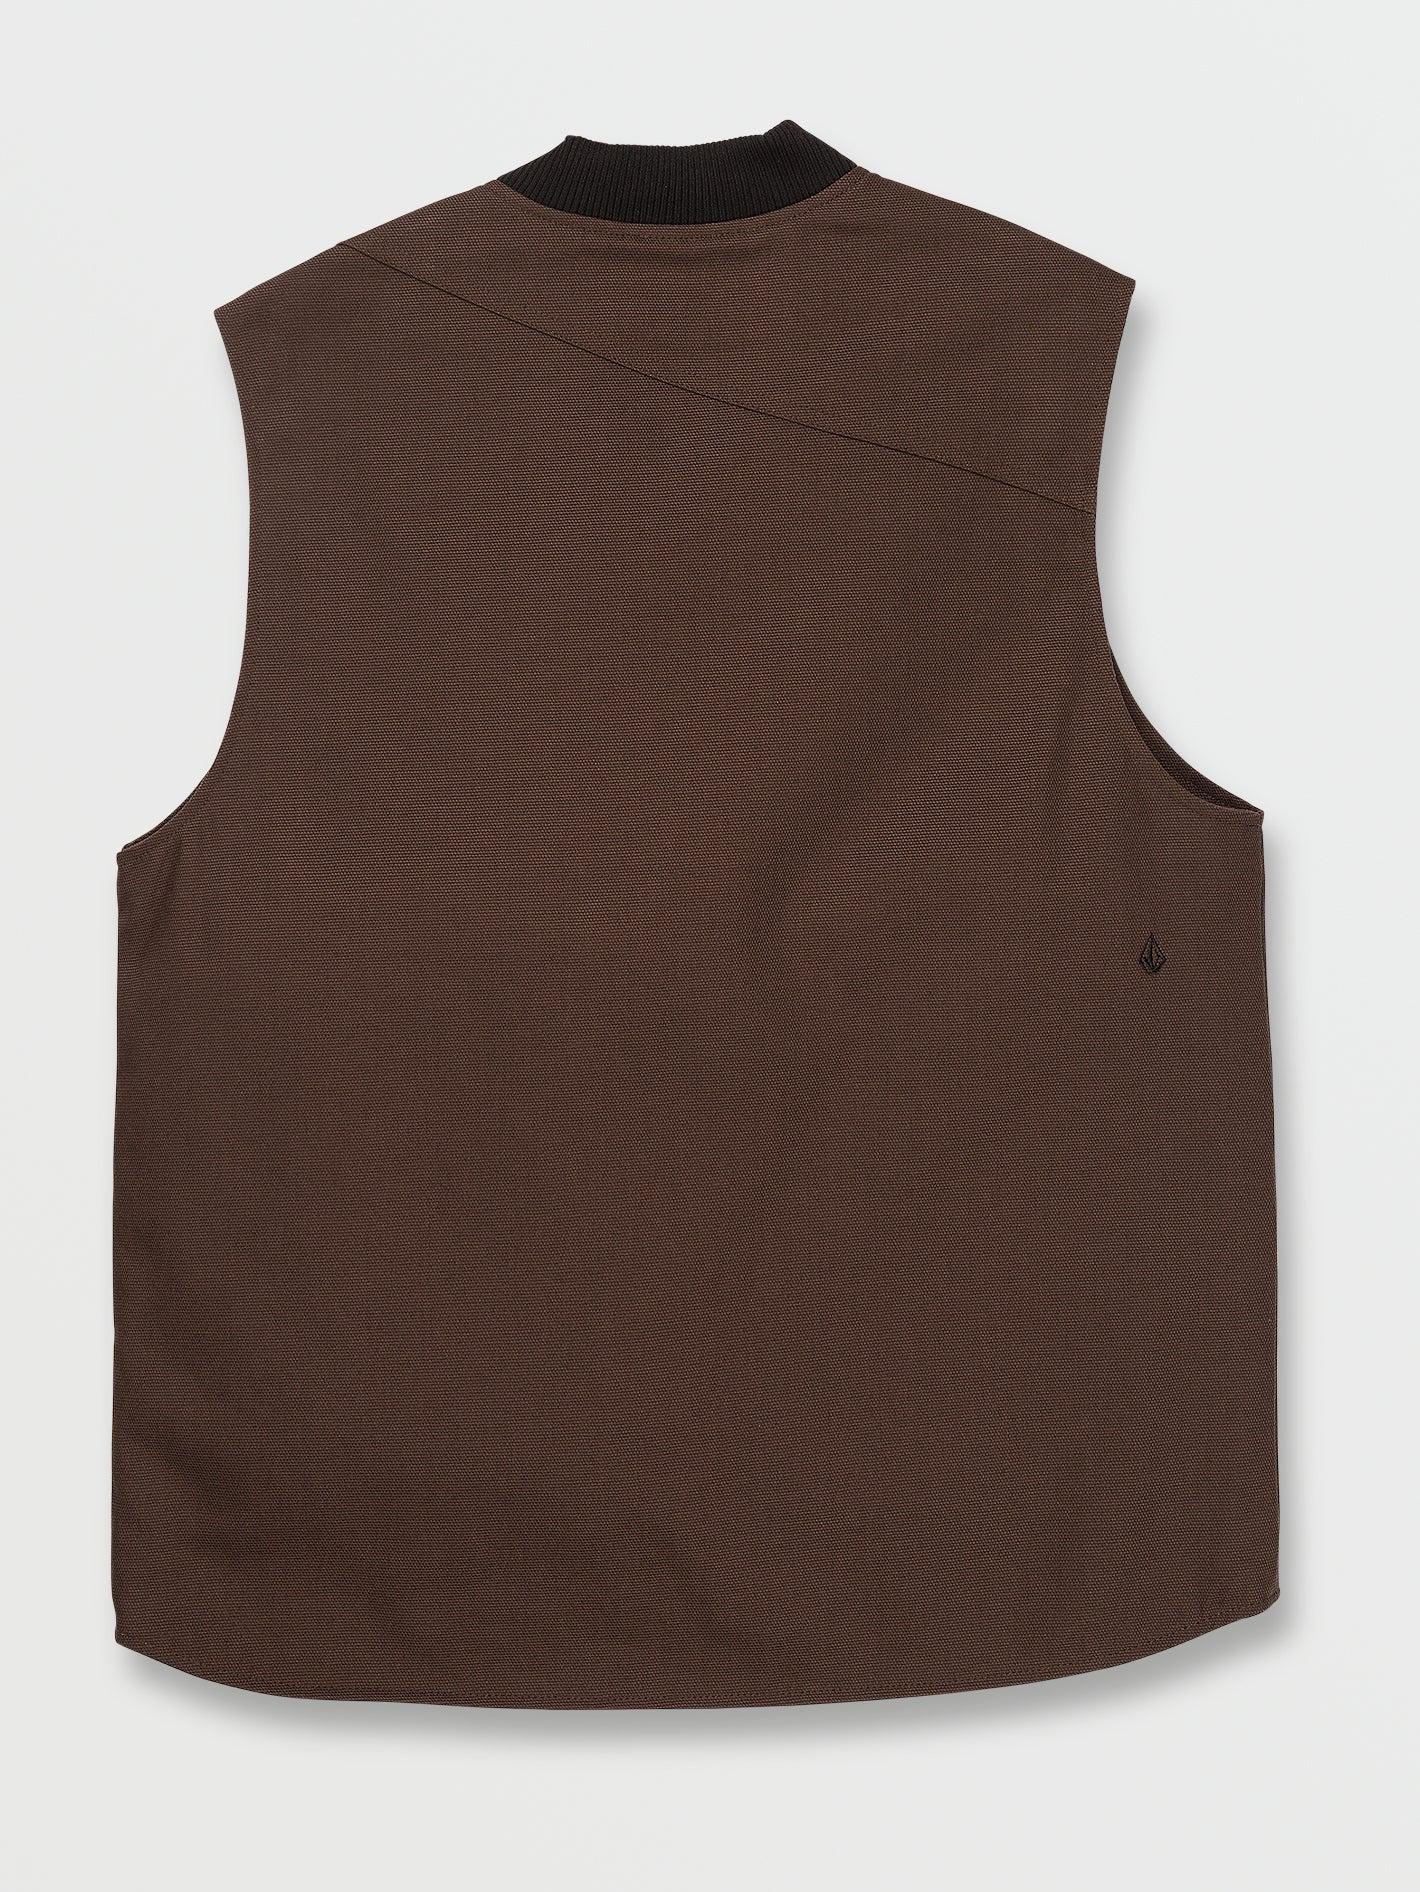 Pin-Buckle Cut Out Vest, Charcoal – SourceUnknown